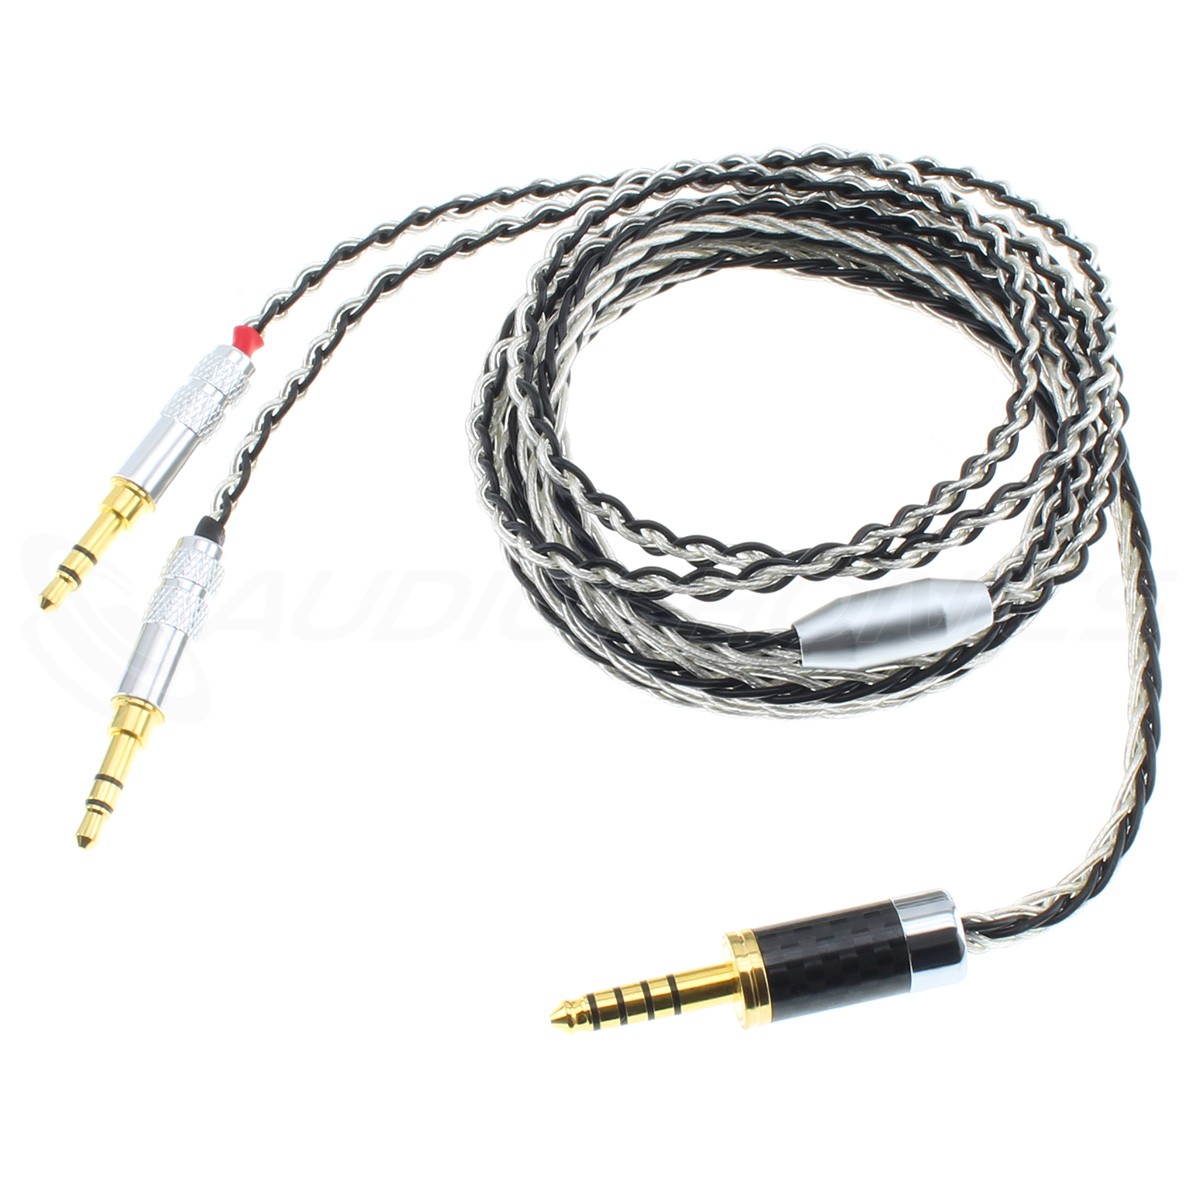 Balanced Headphone Cable Male Jack 4.4mm to 2x Male Jack 3.5mm Copper Silver 1.5m